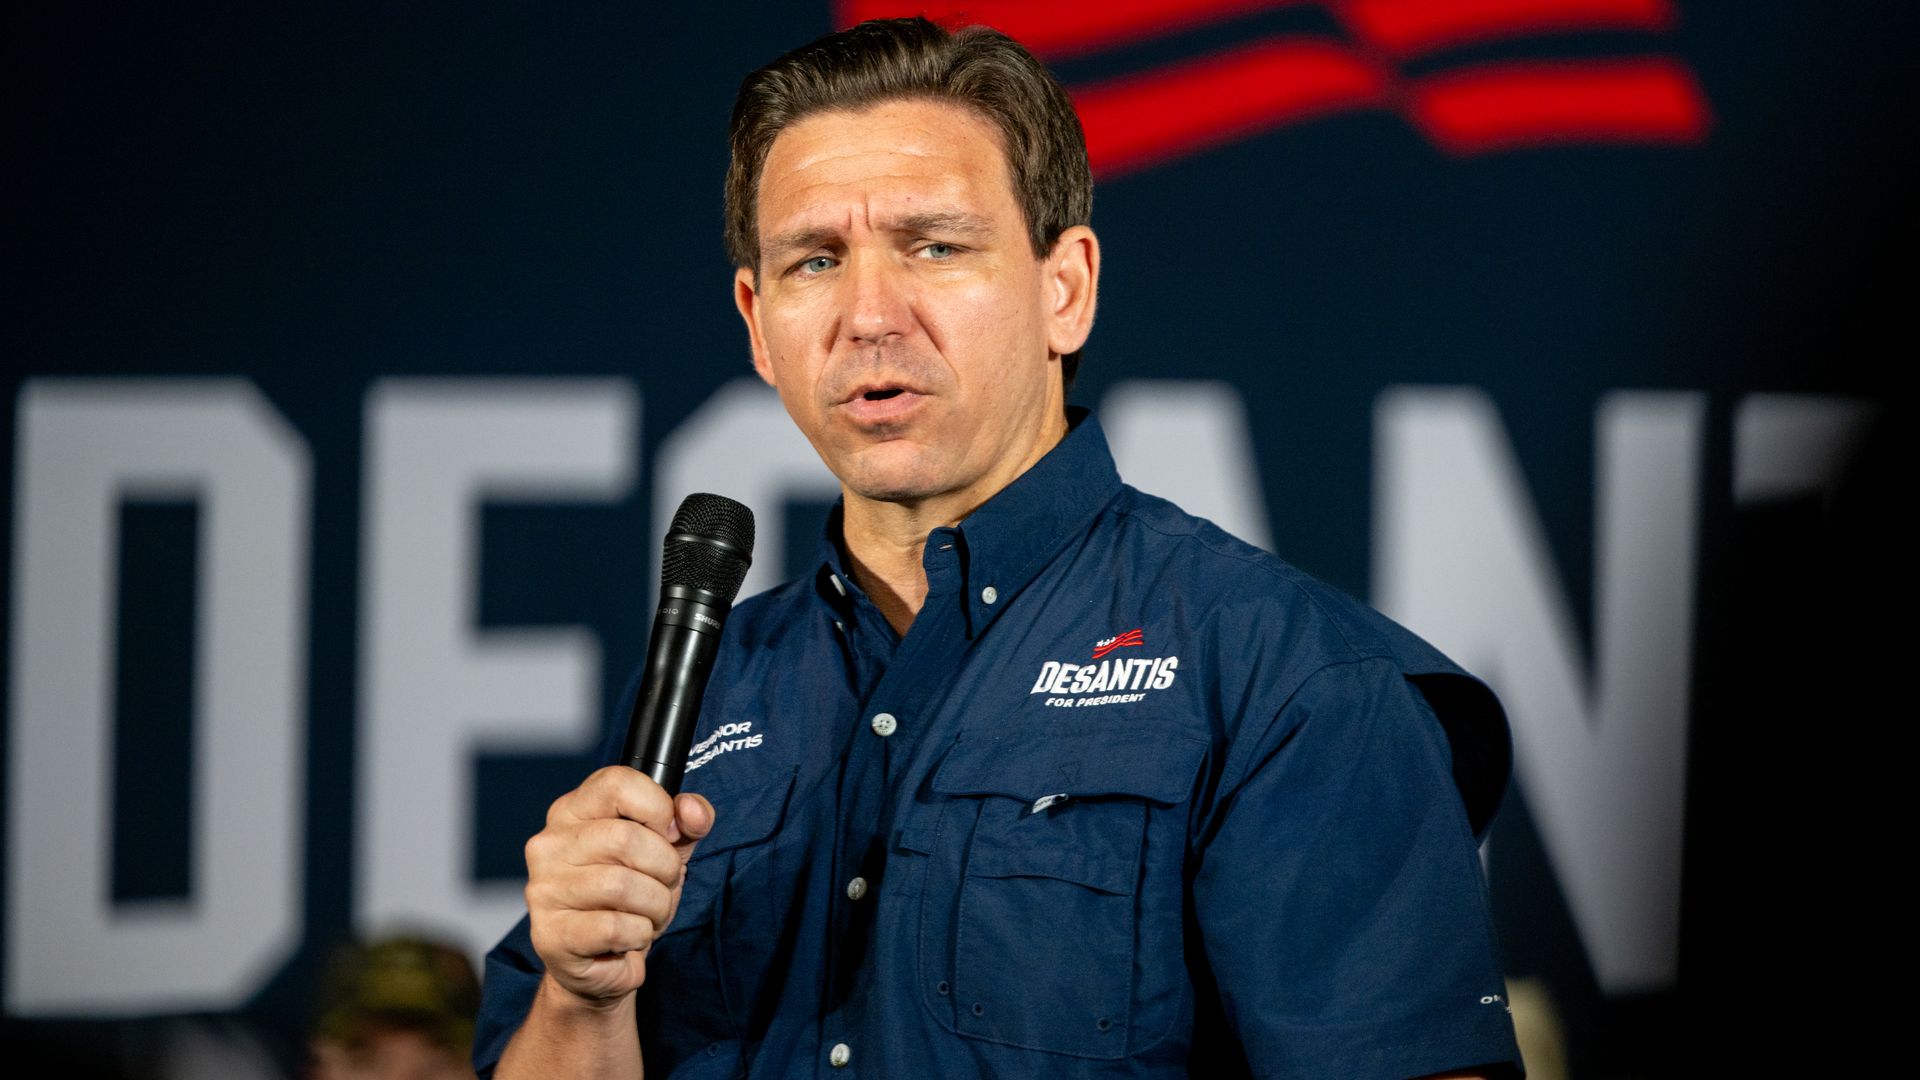 Florida Gov. Ron DeSantis speaks at a campaign rally in Texas last month.